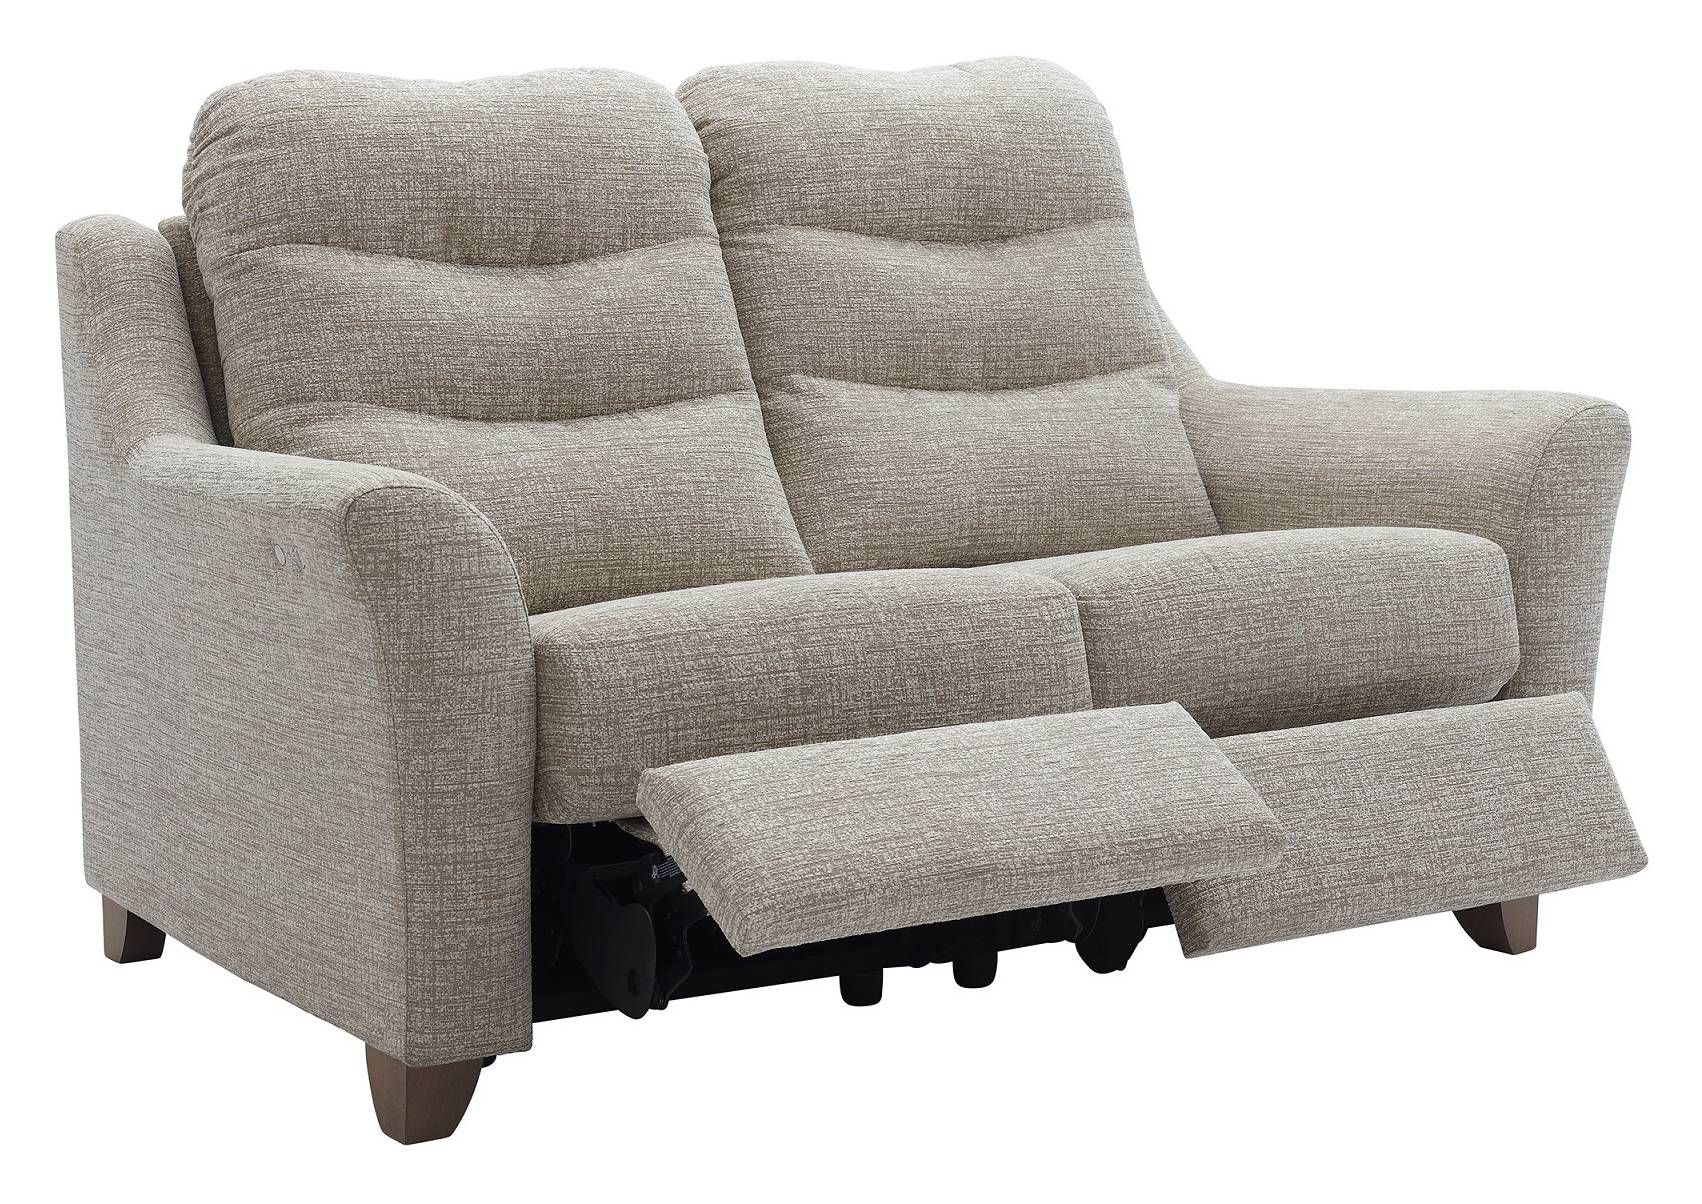 G Plan Tate Fixed & Recliner Sofa |oldrids & Downtown Within Tate Ii Sofa Chairs (Photo 11 of 25)